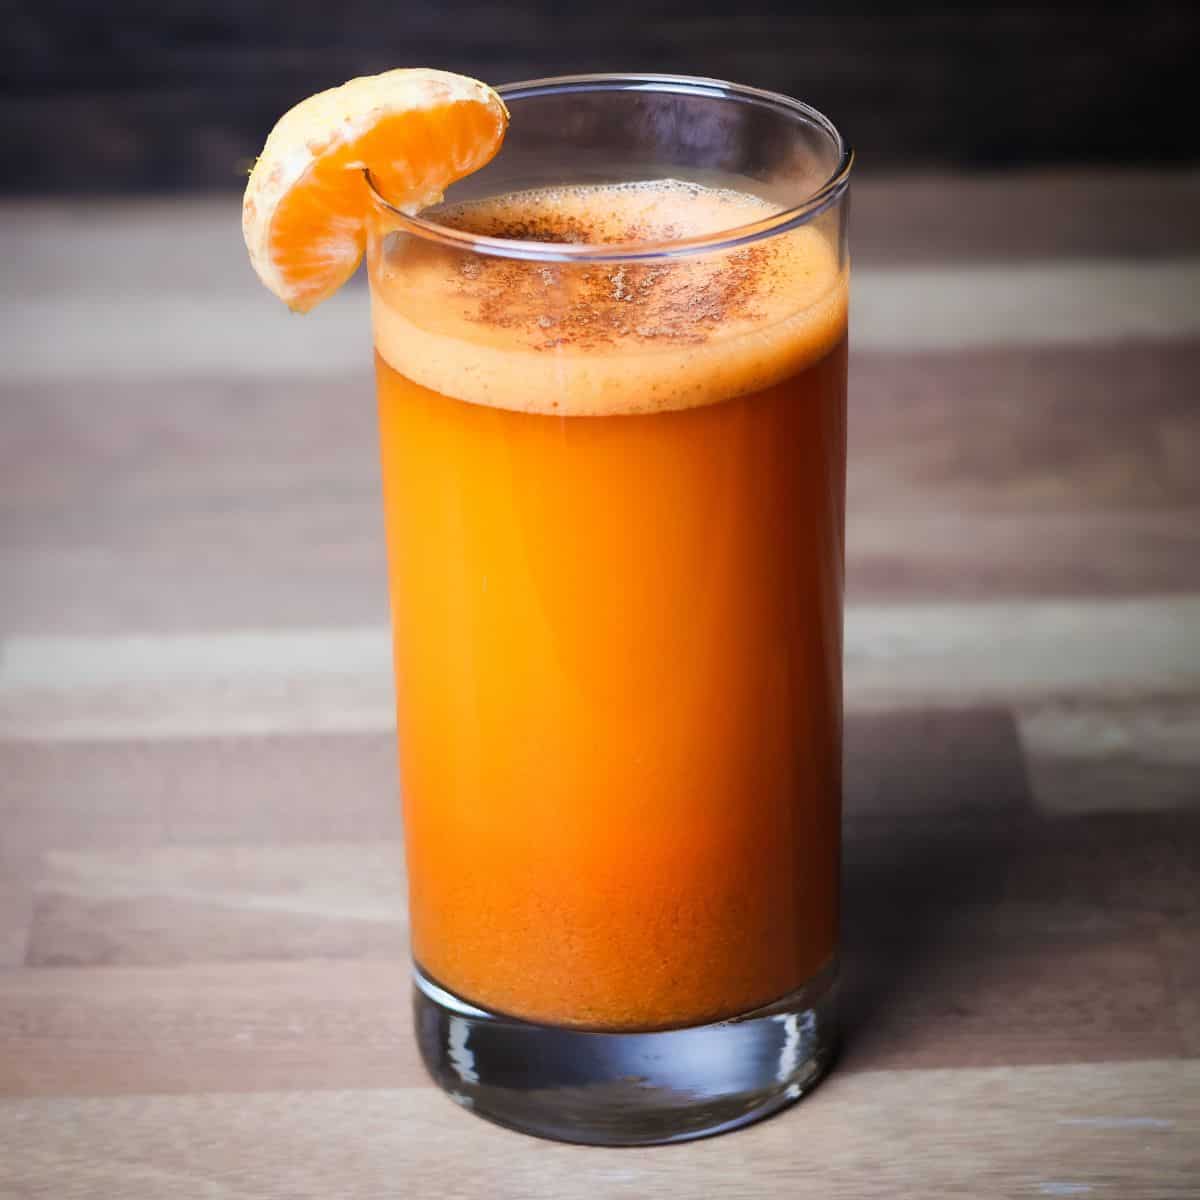 A clear glass filled with freshly made sweet potato juice, exhibiting a deep orange hue. It's garnished with a small slice of orange on the rim, set against a dark wooden backdrop.